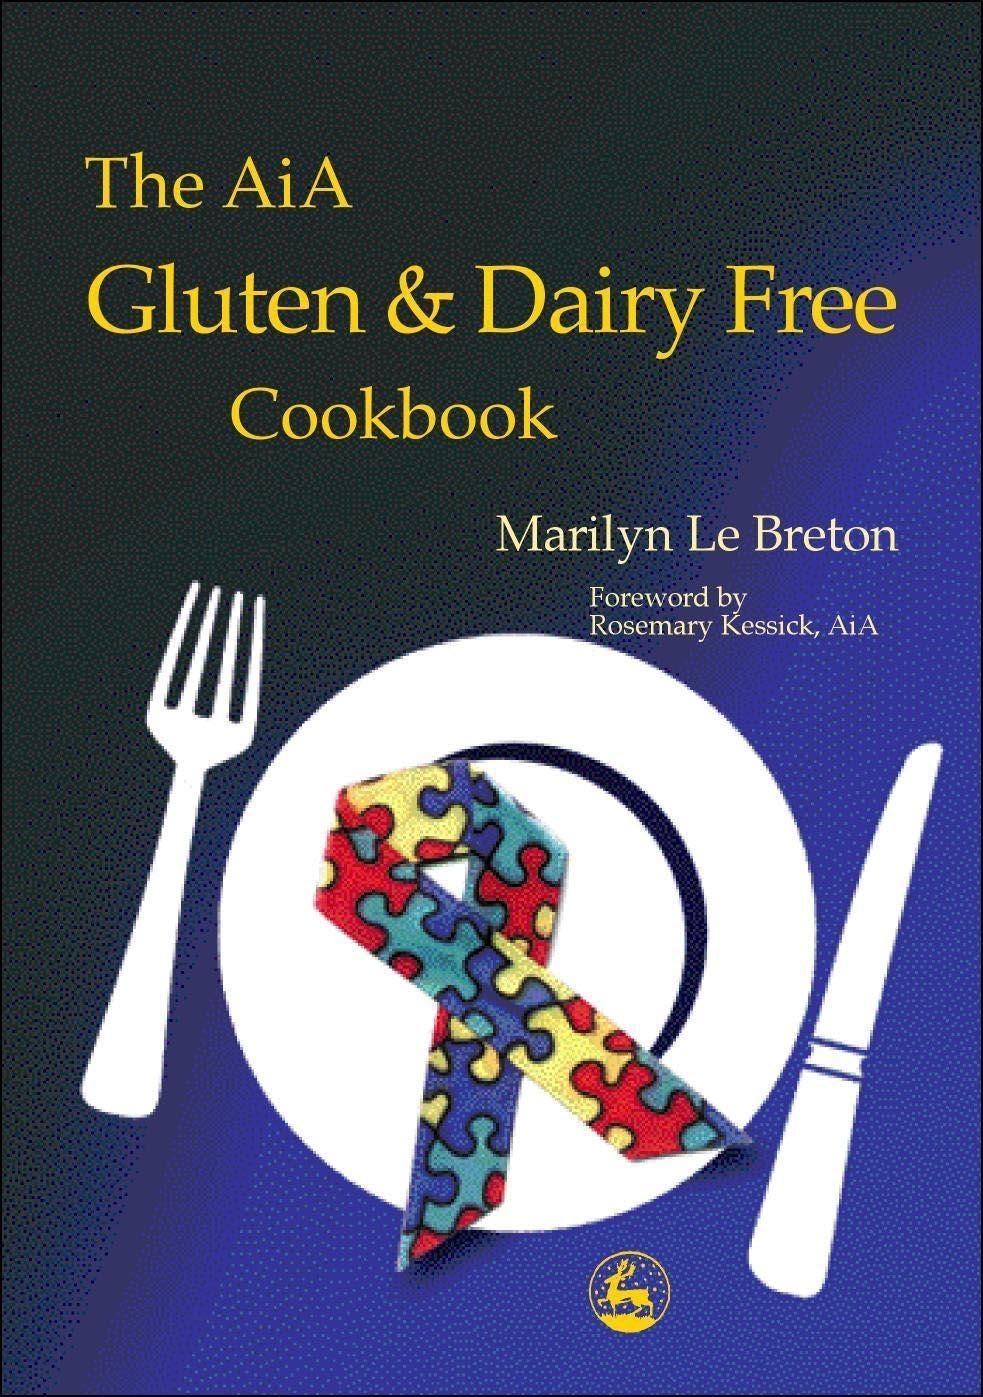 The AiA Gluten and Dairy Free Cookbook by Rosemary Kessick